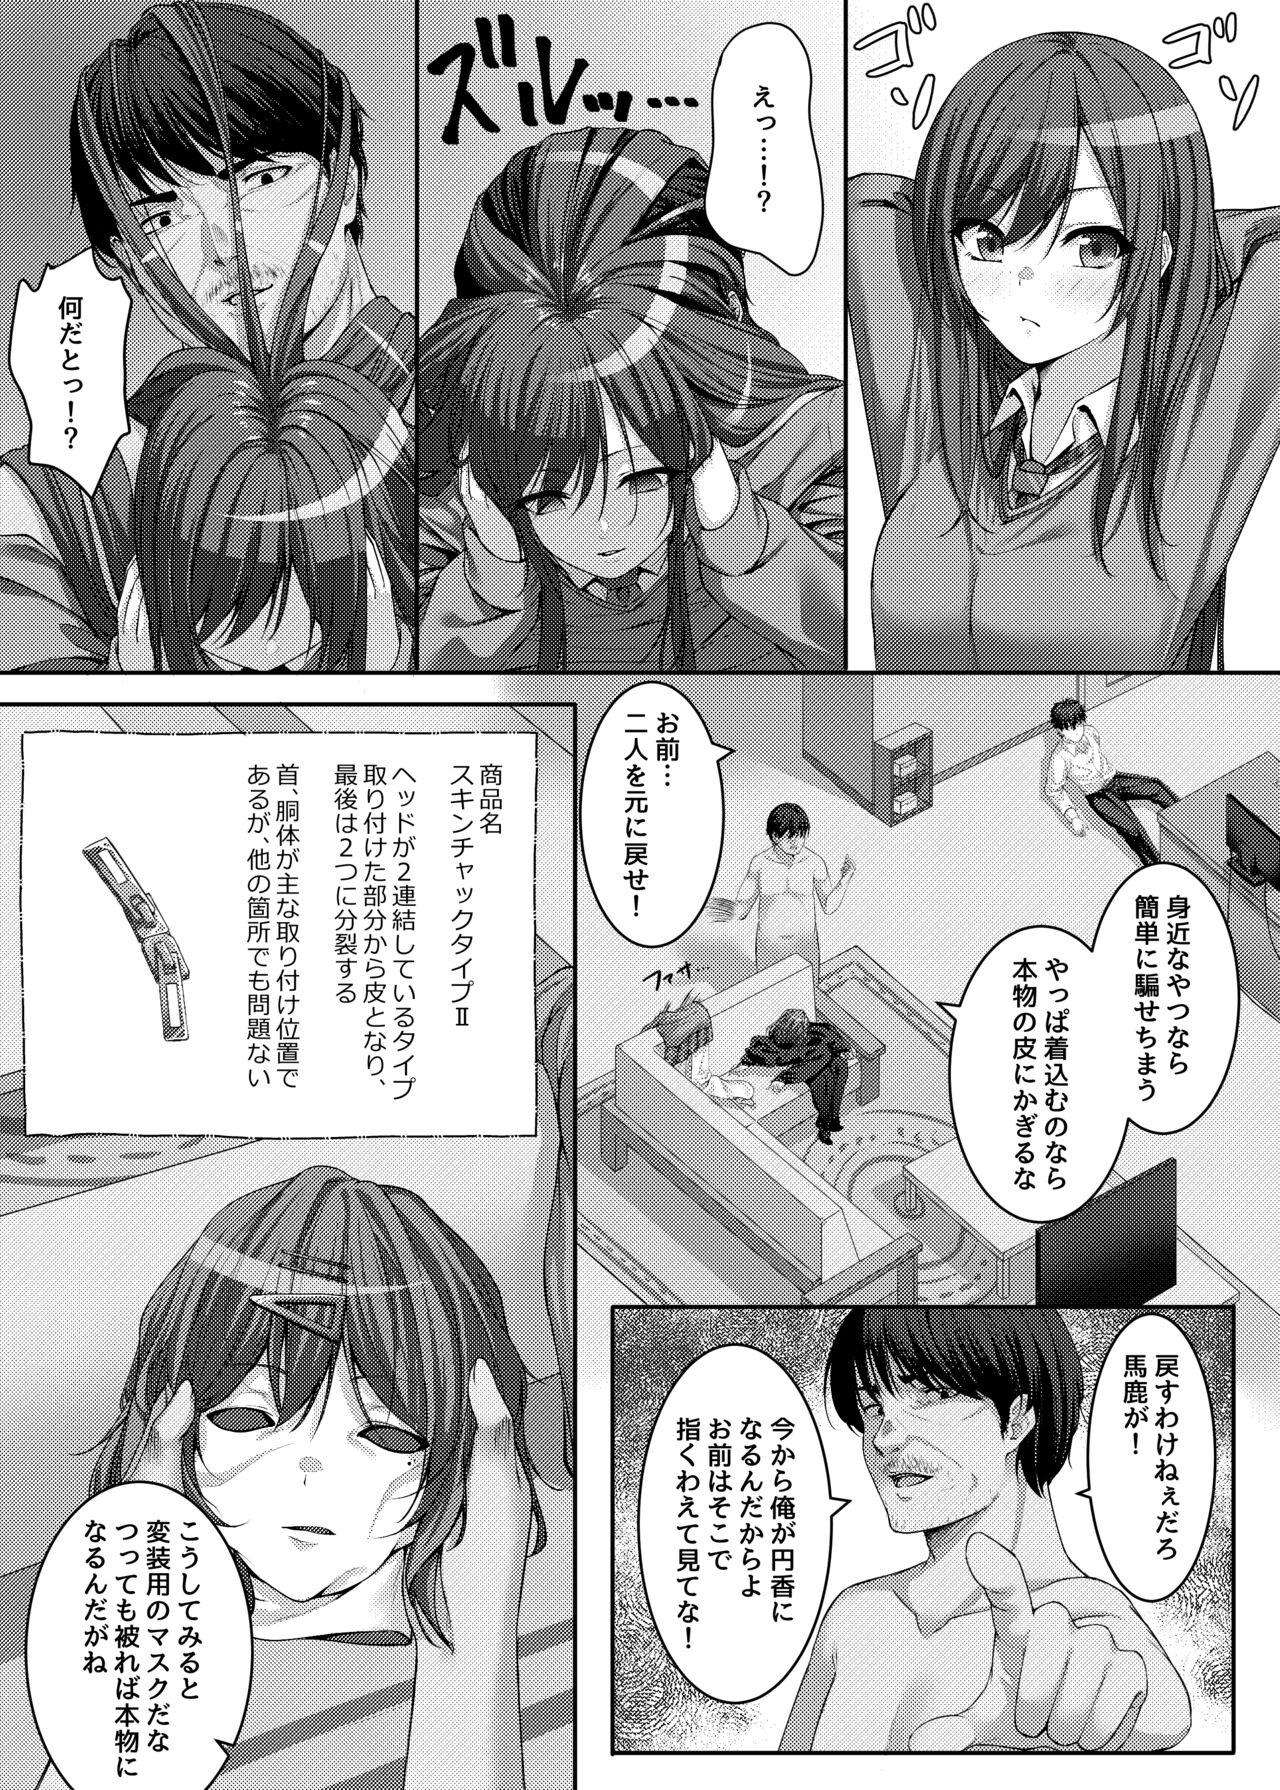 Adult Toys 移り皮り～円香編～ - The idolmaster Gay Shorthair - Page 3